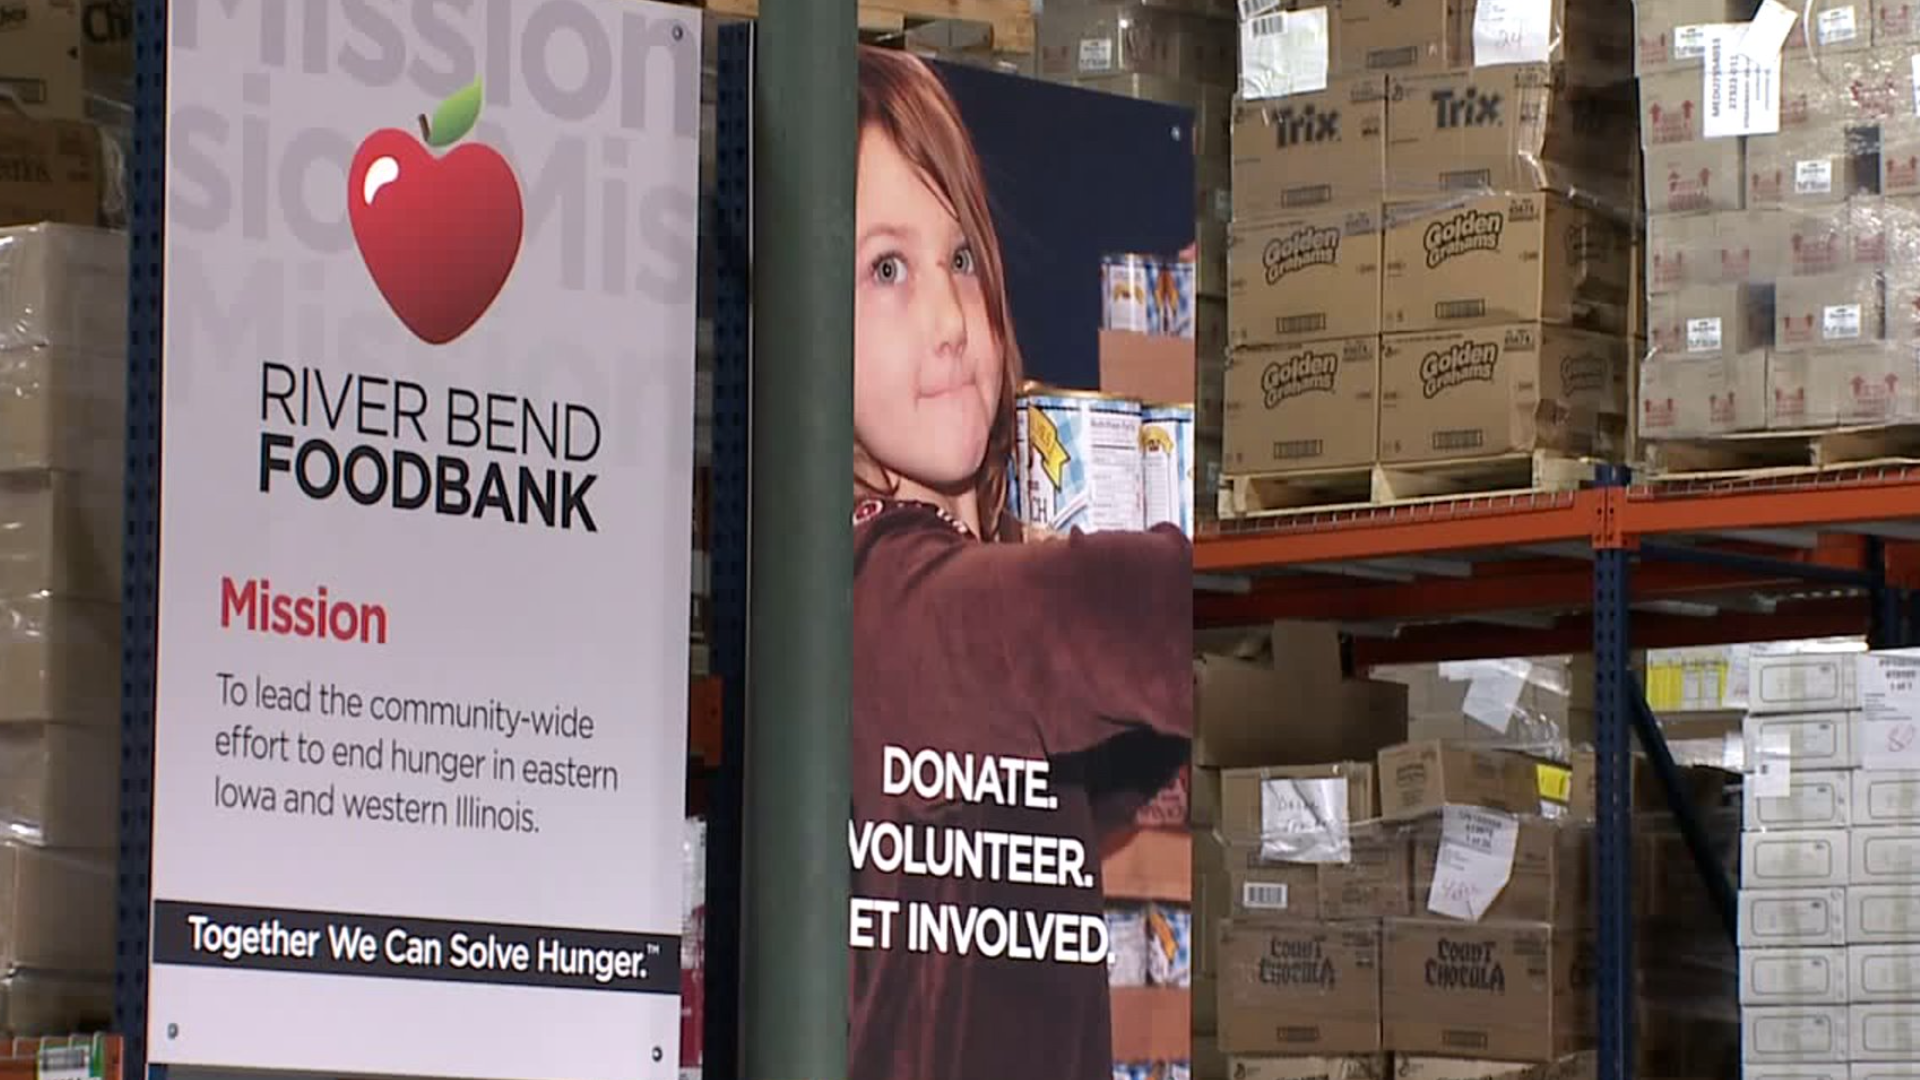 Riverbend Foodbank gets donation from area farmers